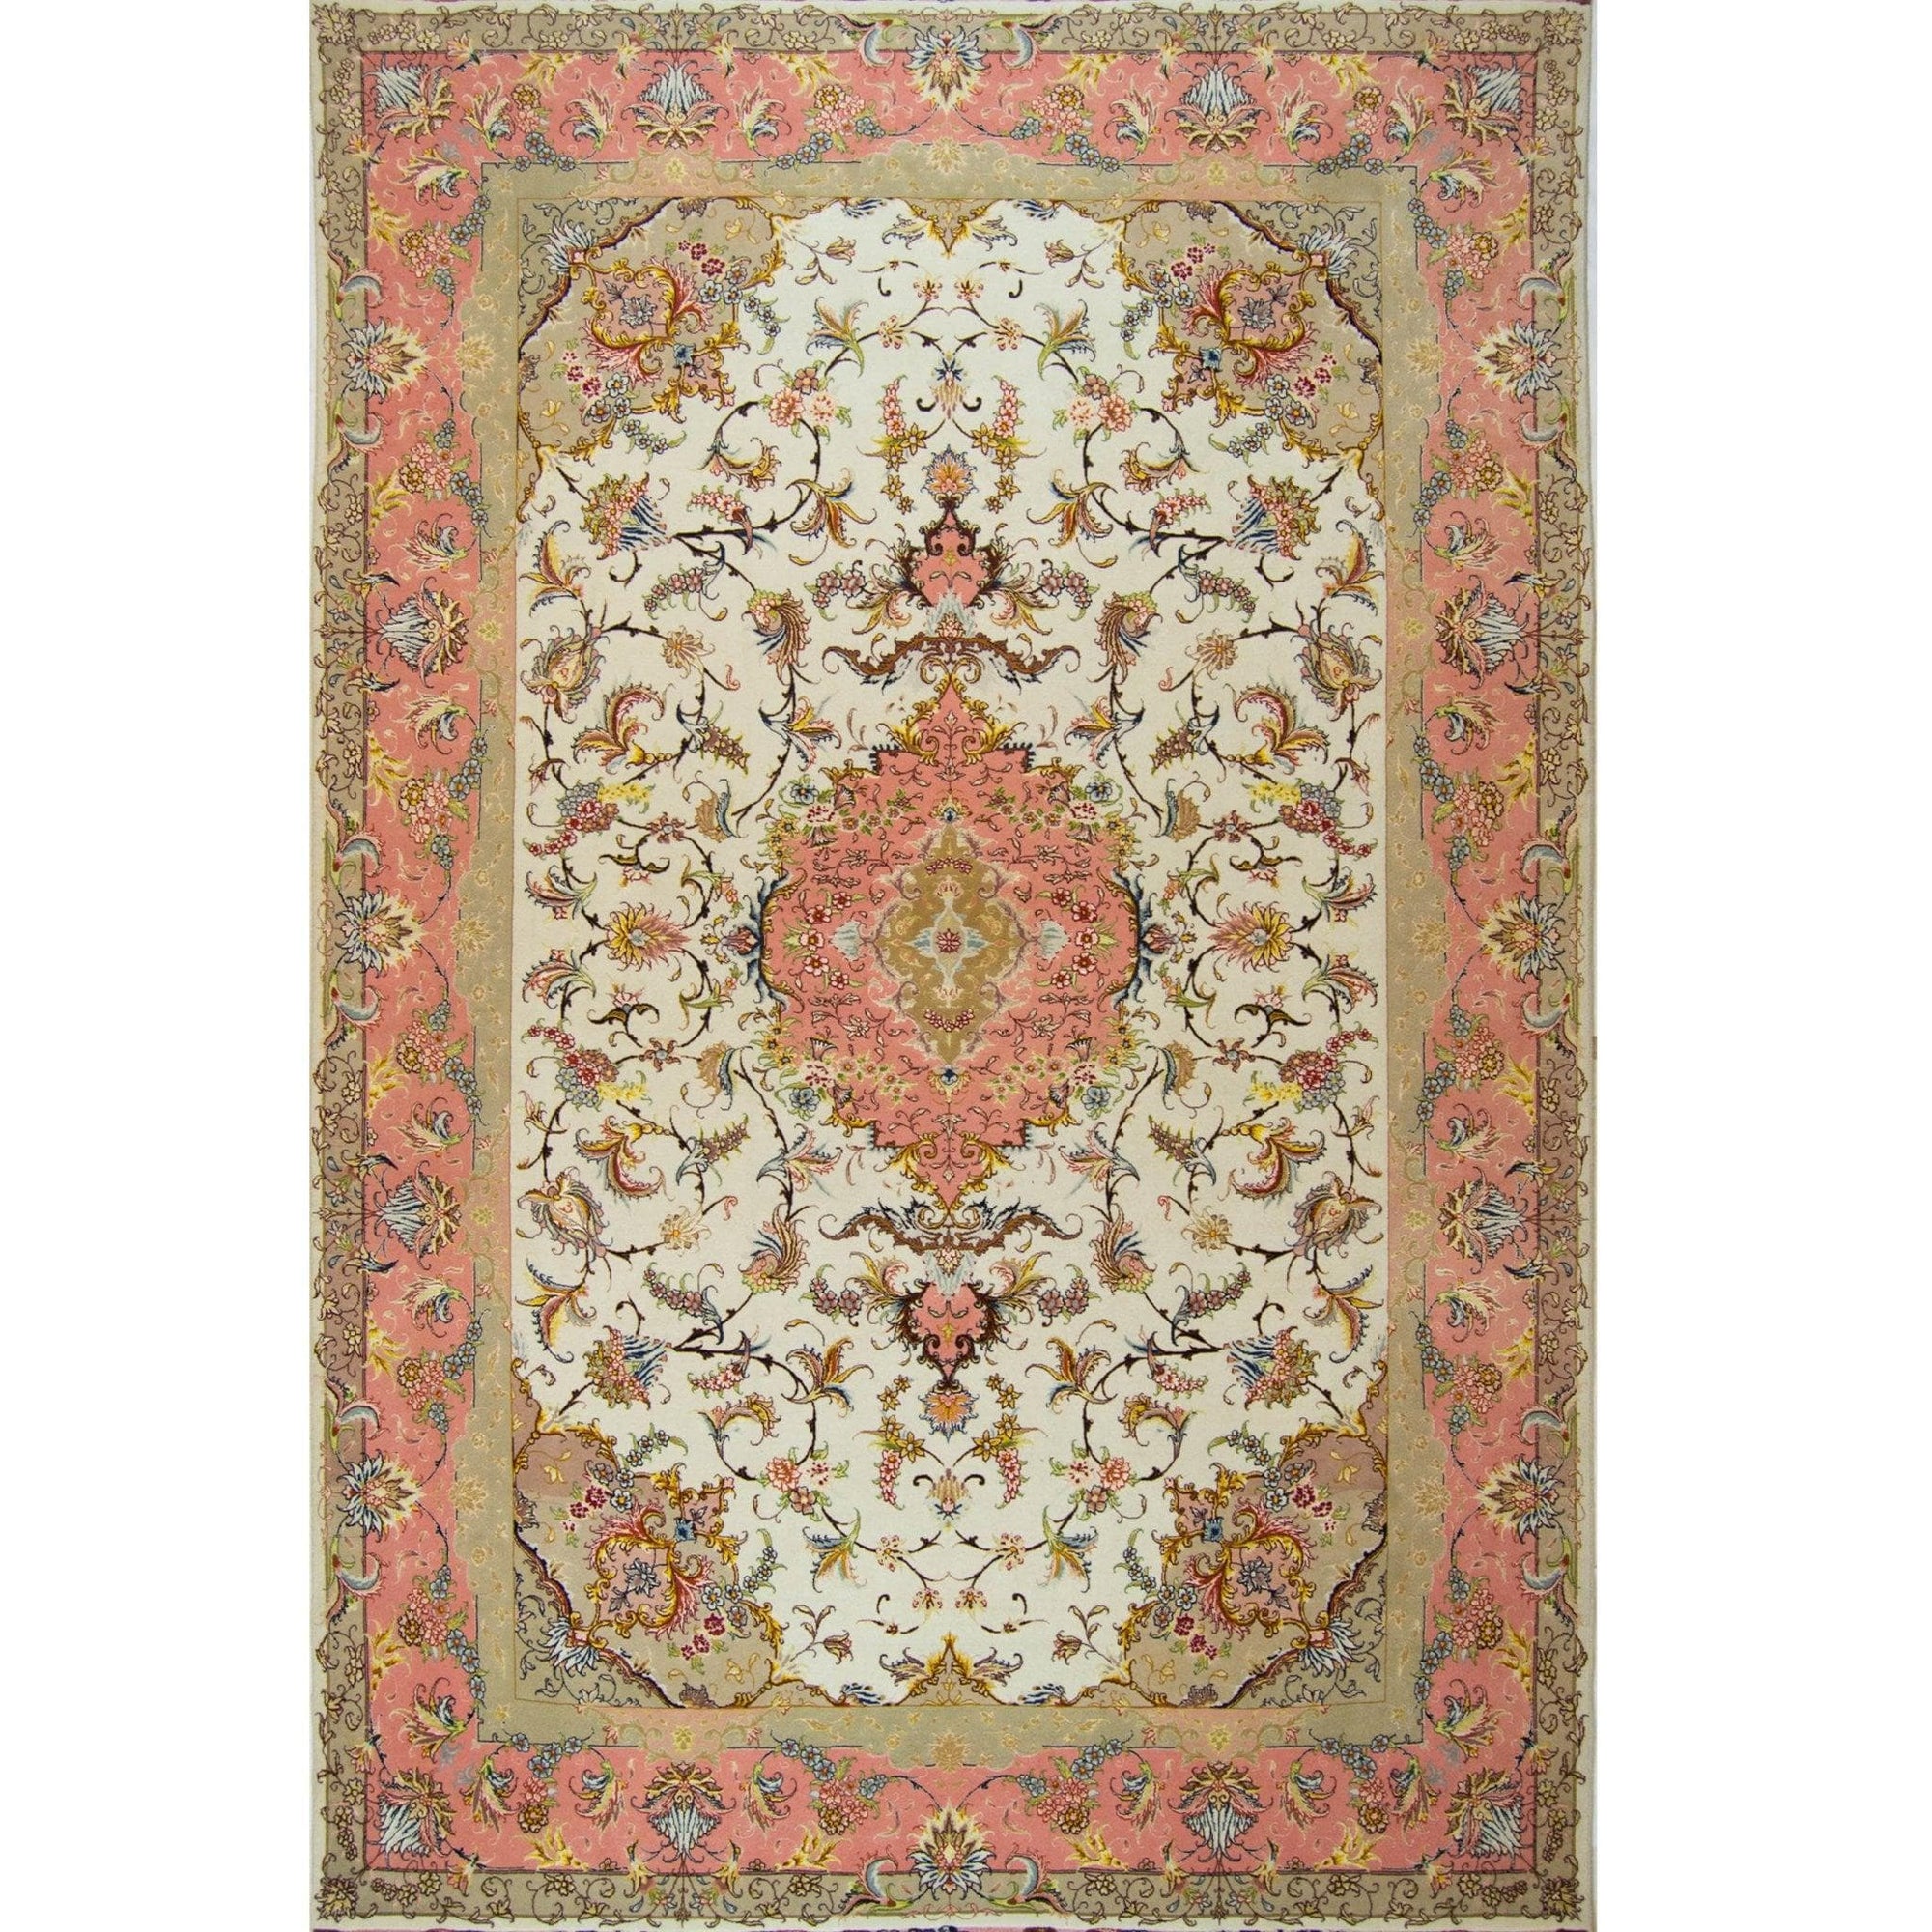 Super Fine Hand-knotted Persian Wool and Silk Tabriz Rug 202 cm x 304 cm